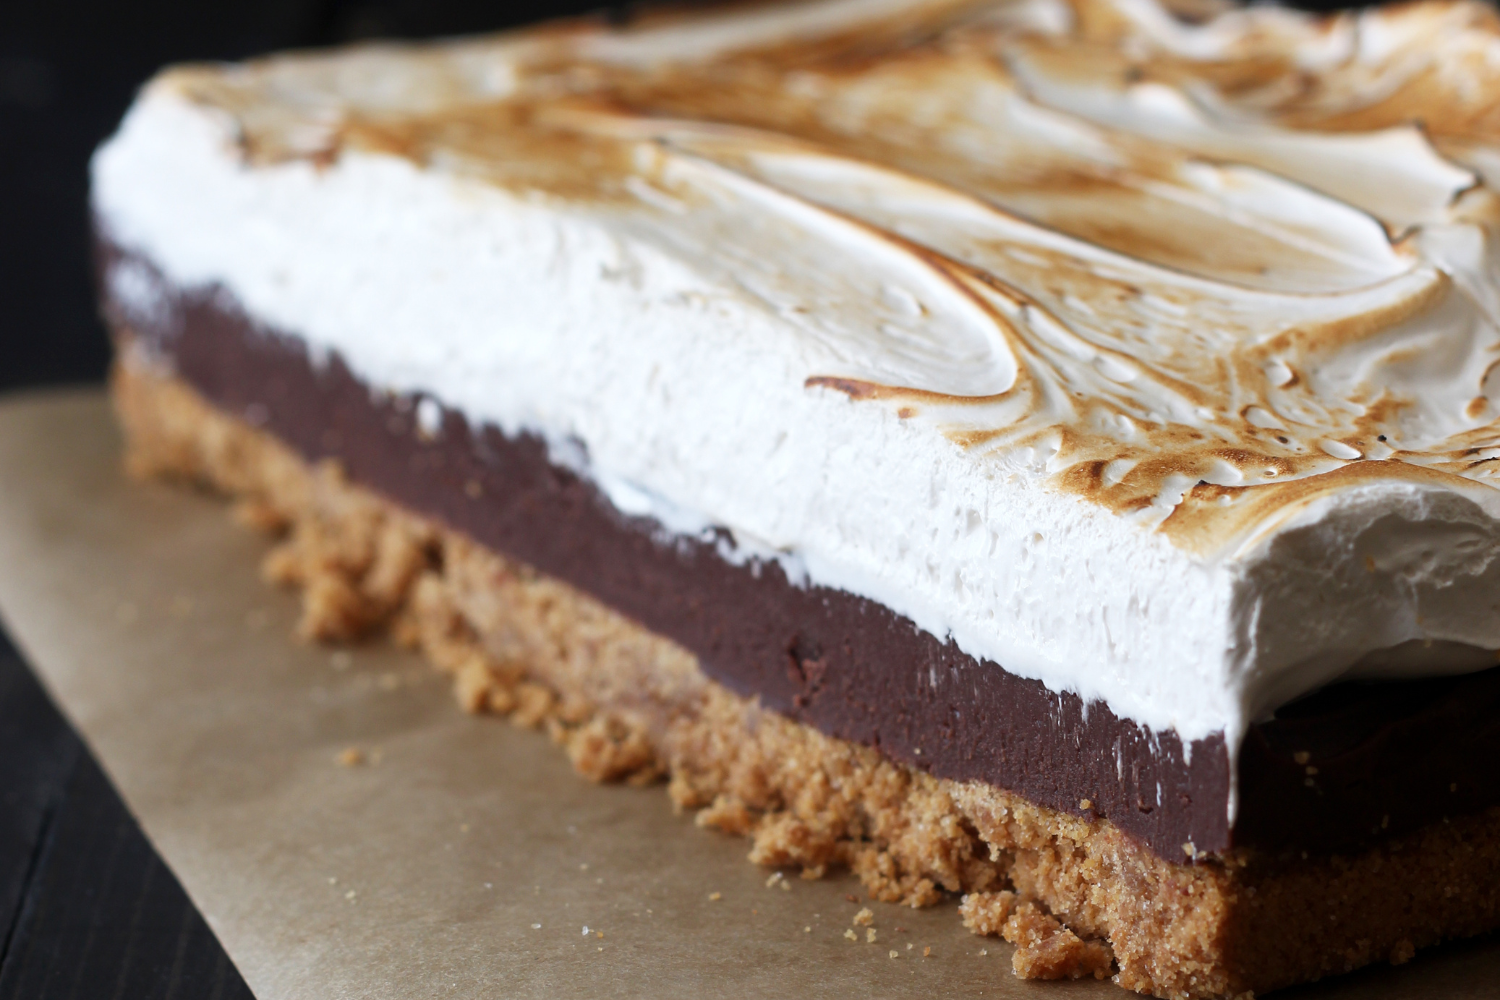 uncut slab of s'mores fudge bars, showing the three delicious distinct layers